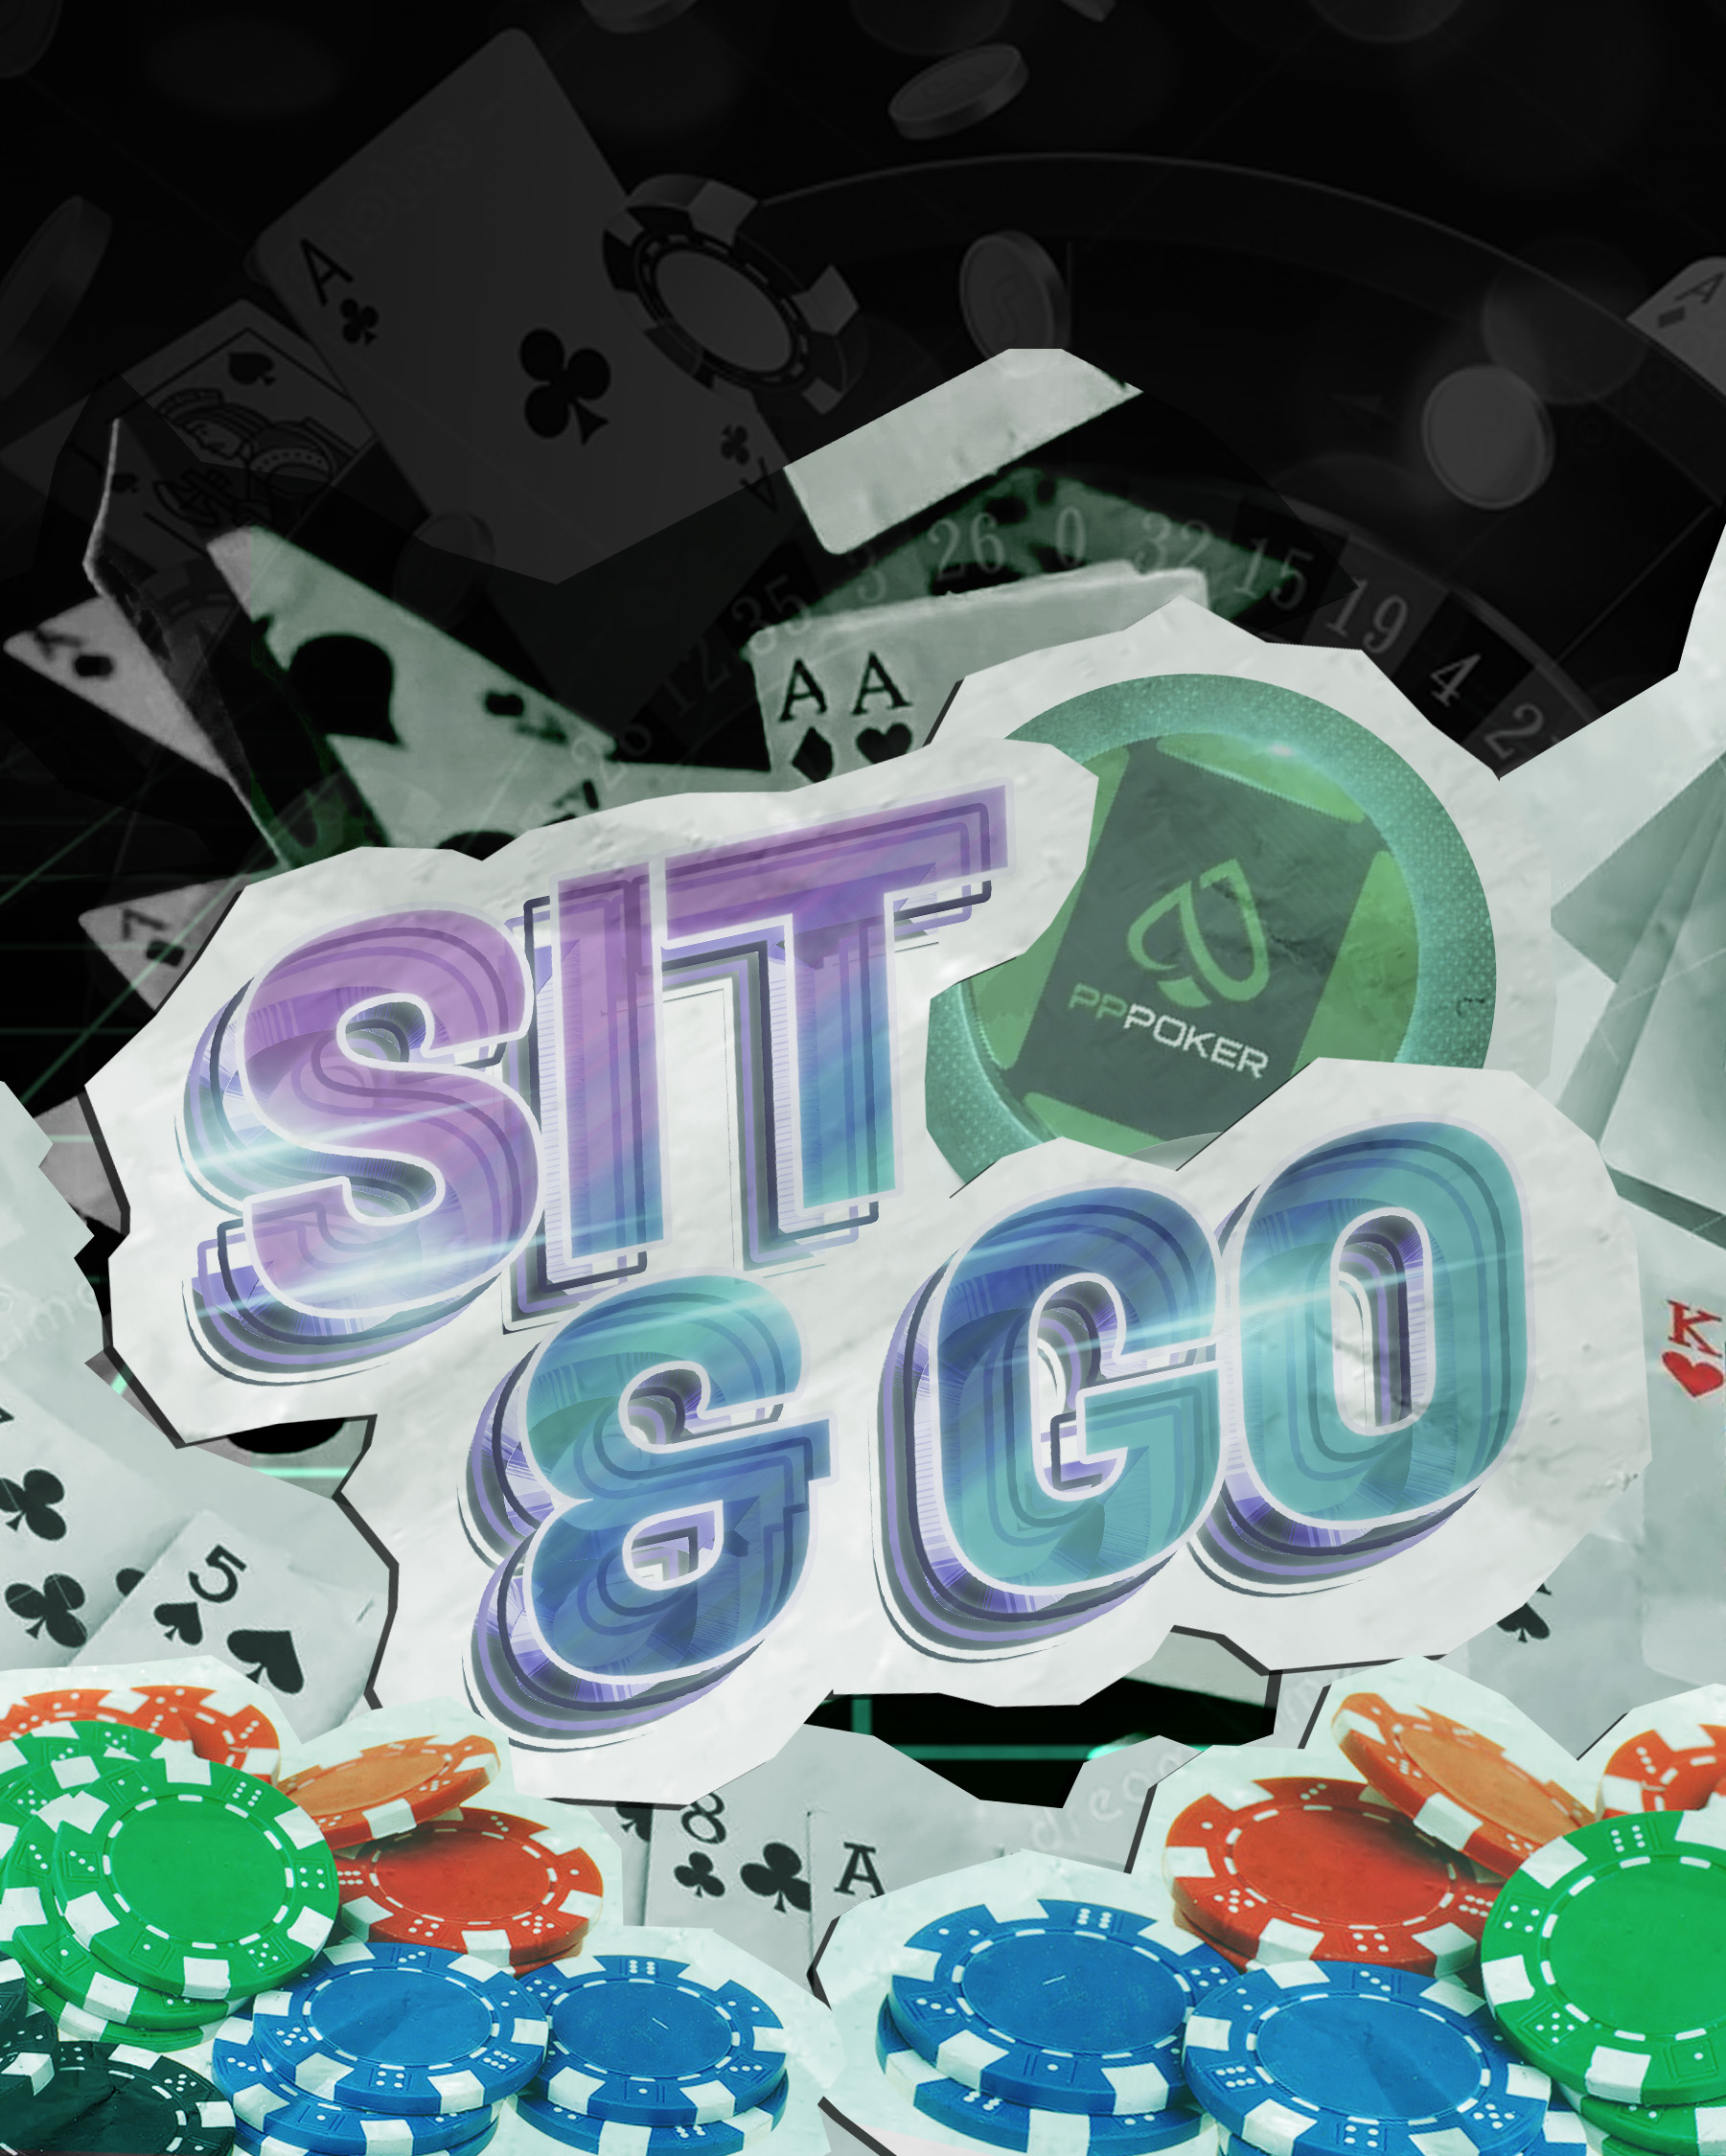 Why you should start playing Sit&Go at PPPoker